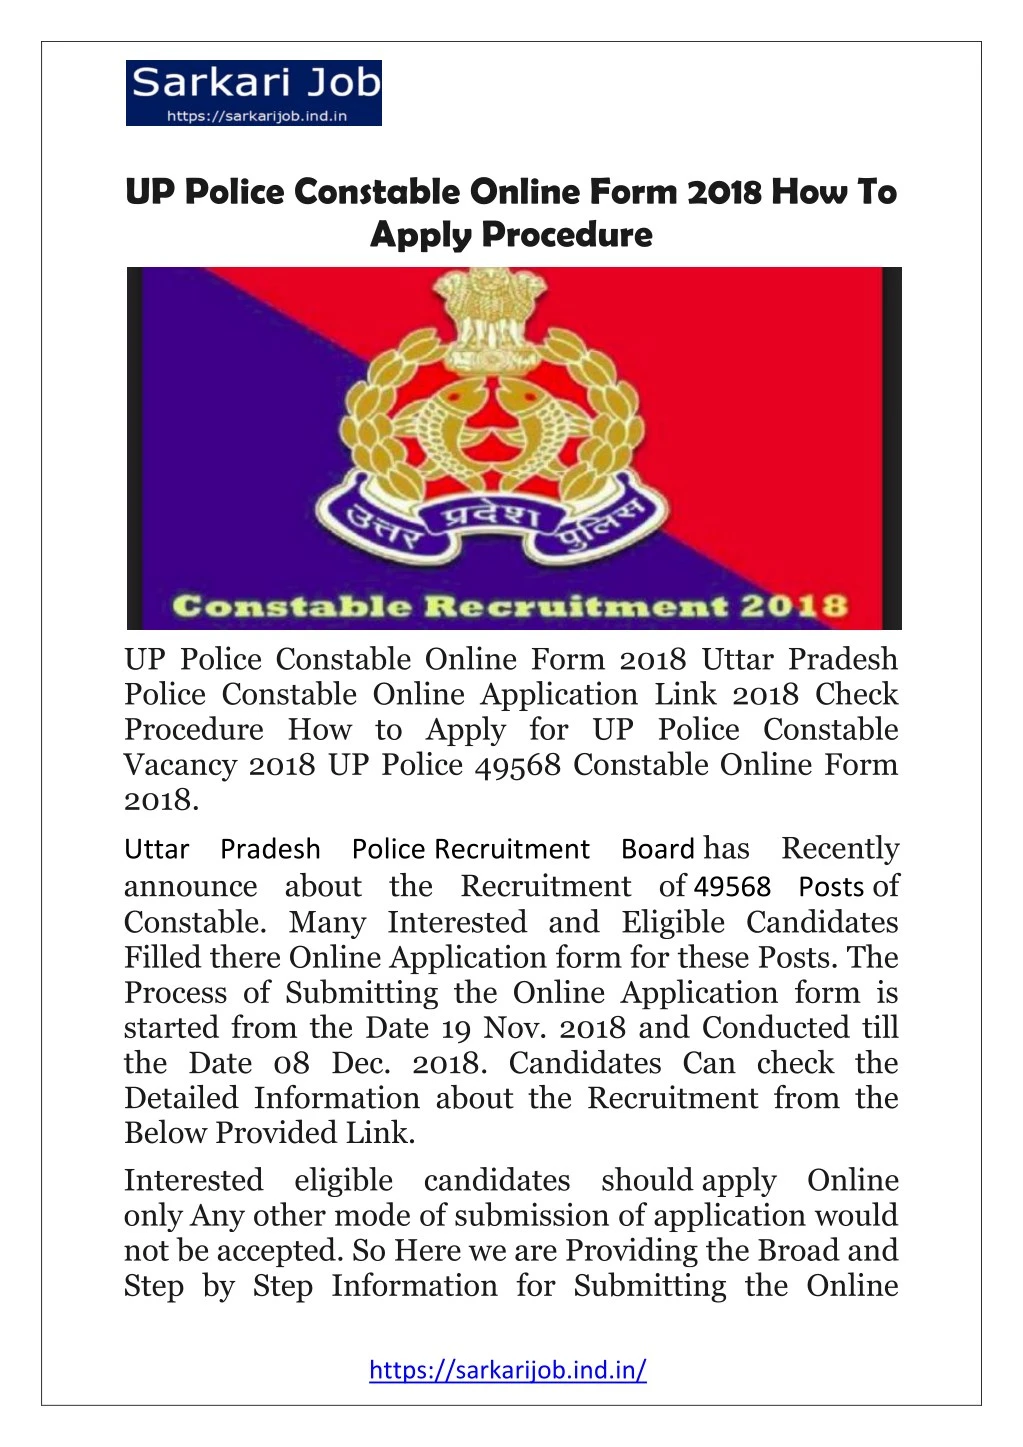 up police constable online form 2018 how to apply